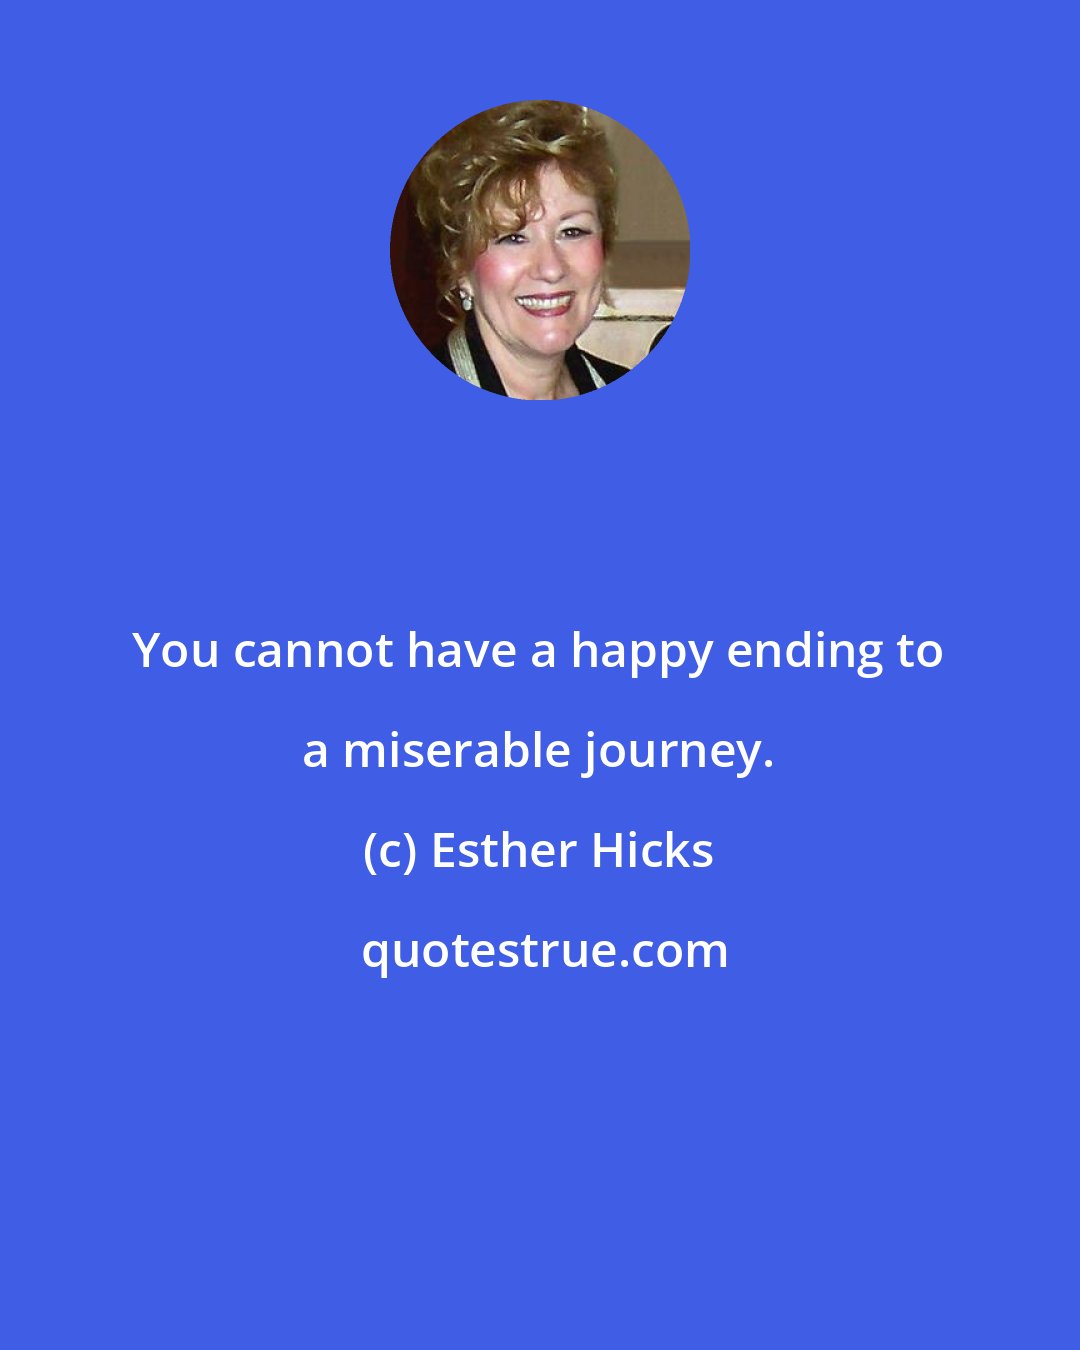 Esther Hicks: You cannot have a happy ending to a miserable journey.